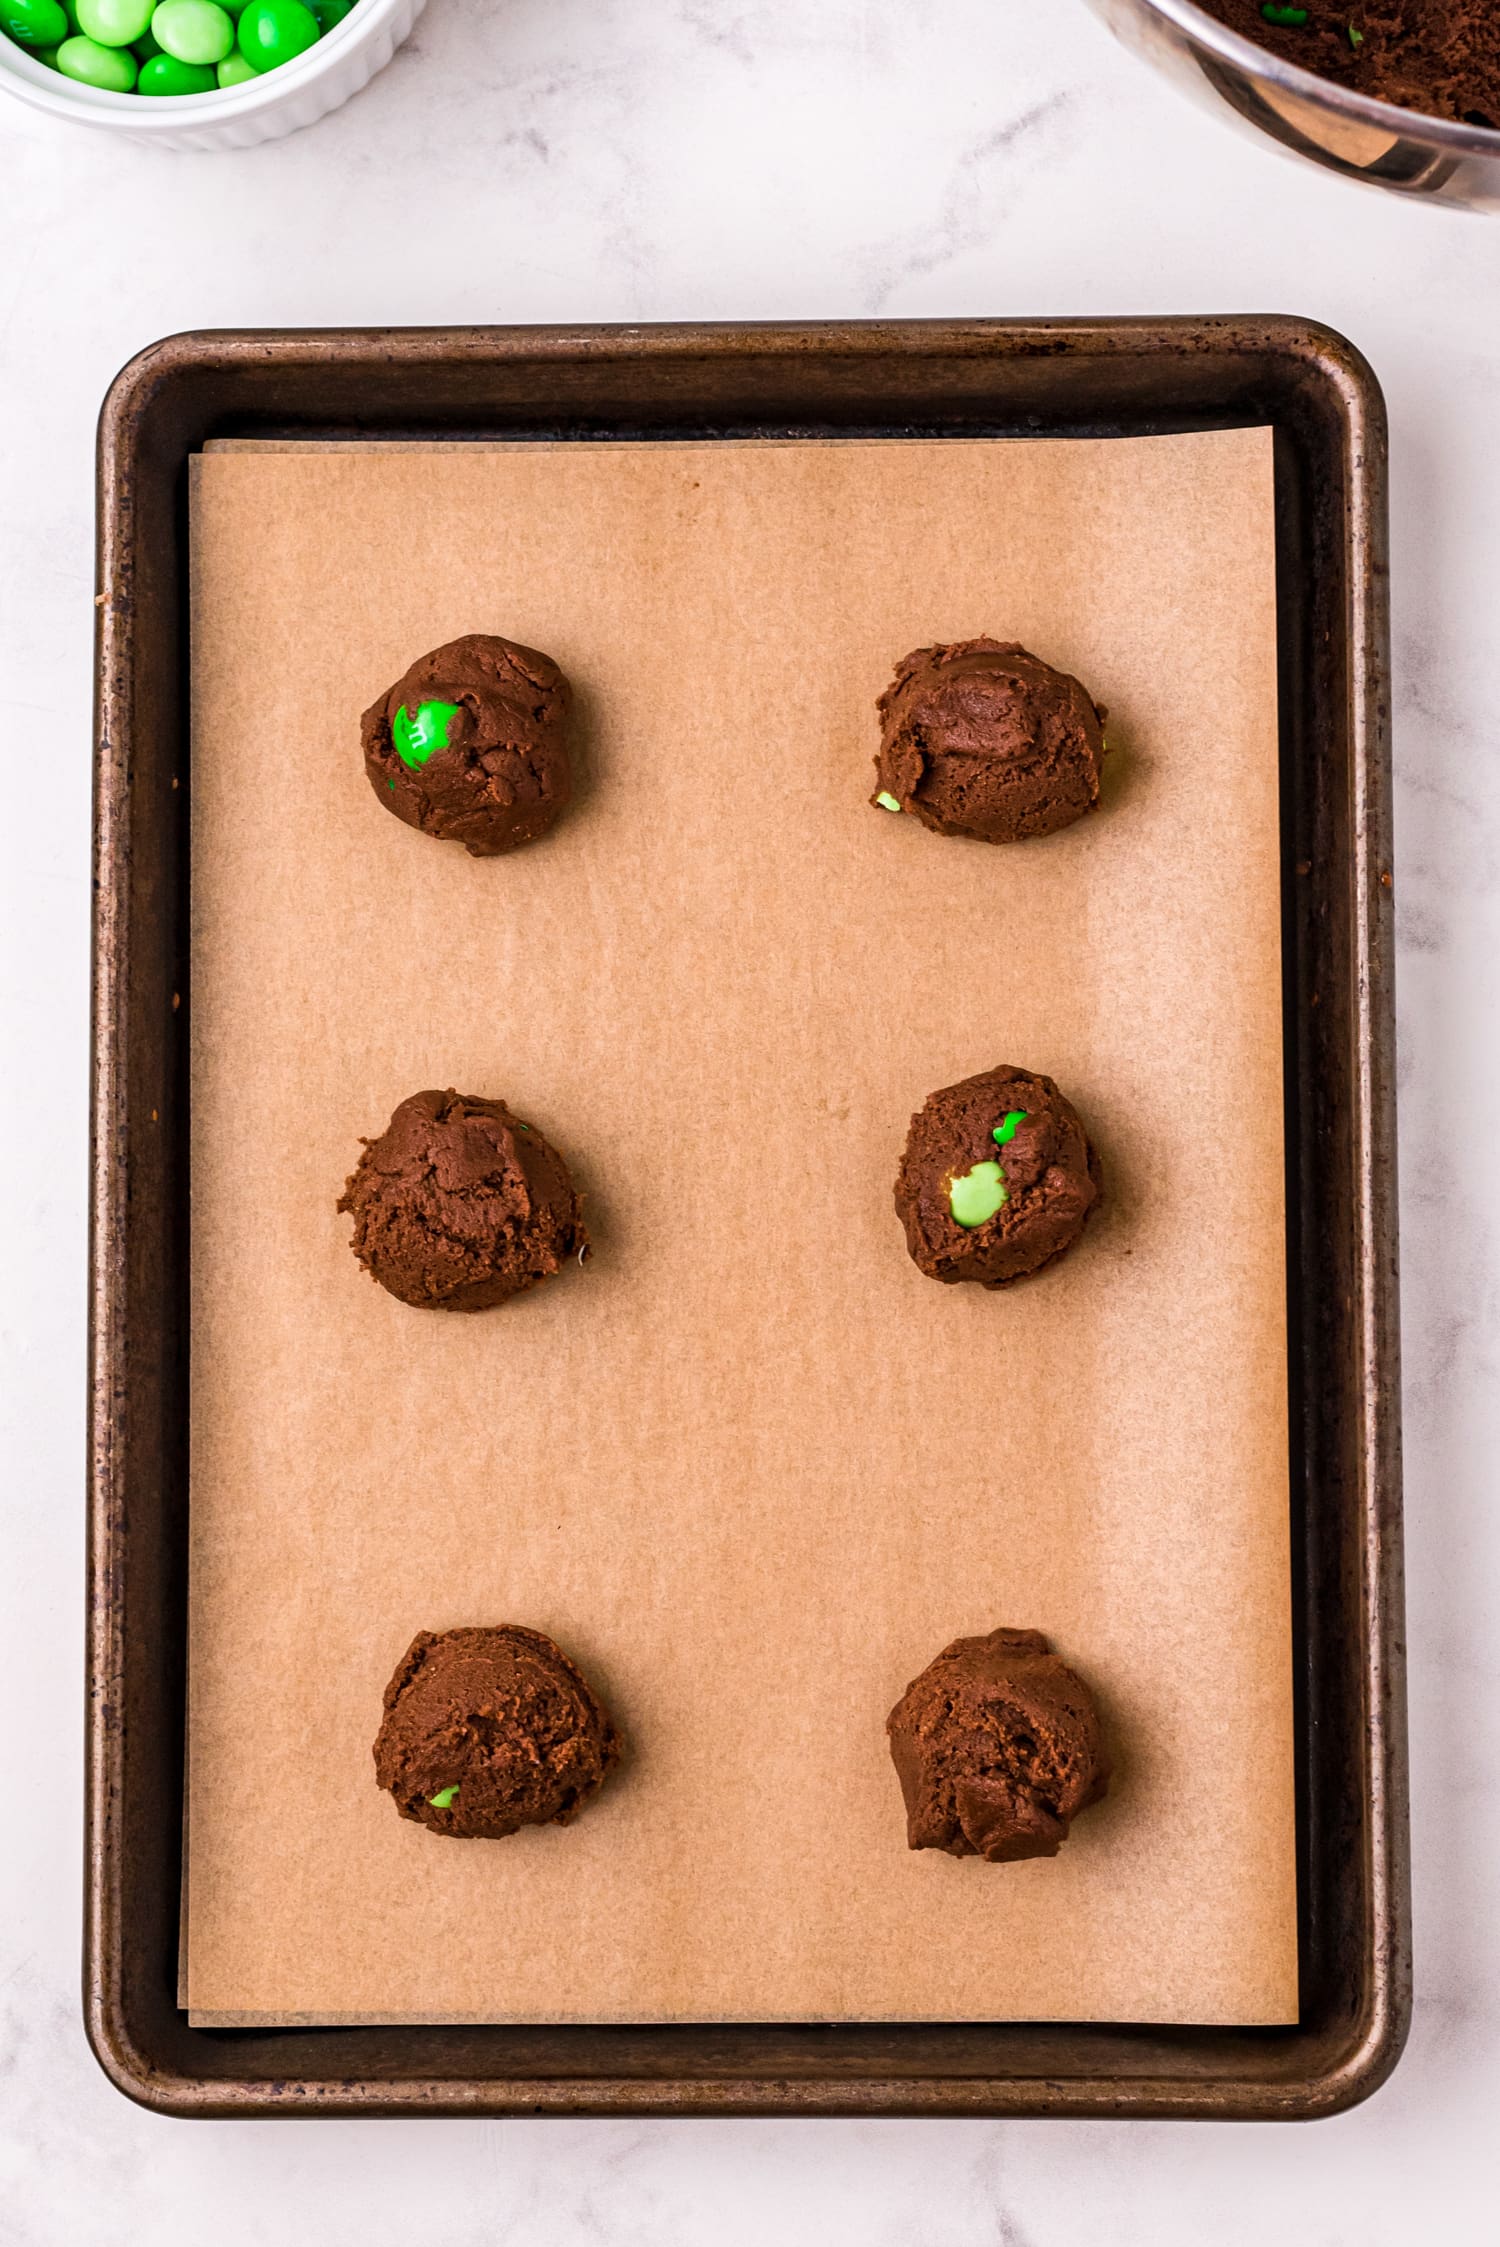 Baking sheet with chocolate cookie dough with mint M&Ms